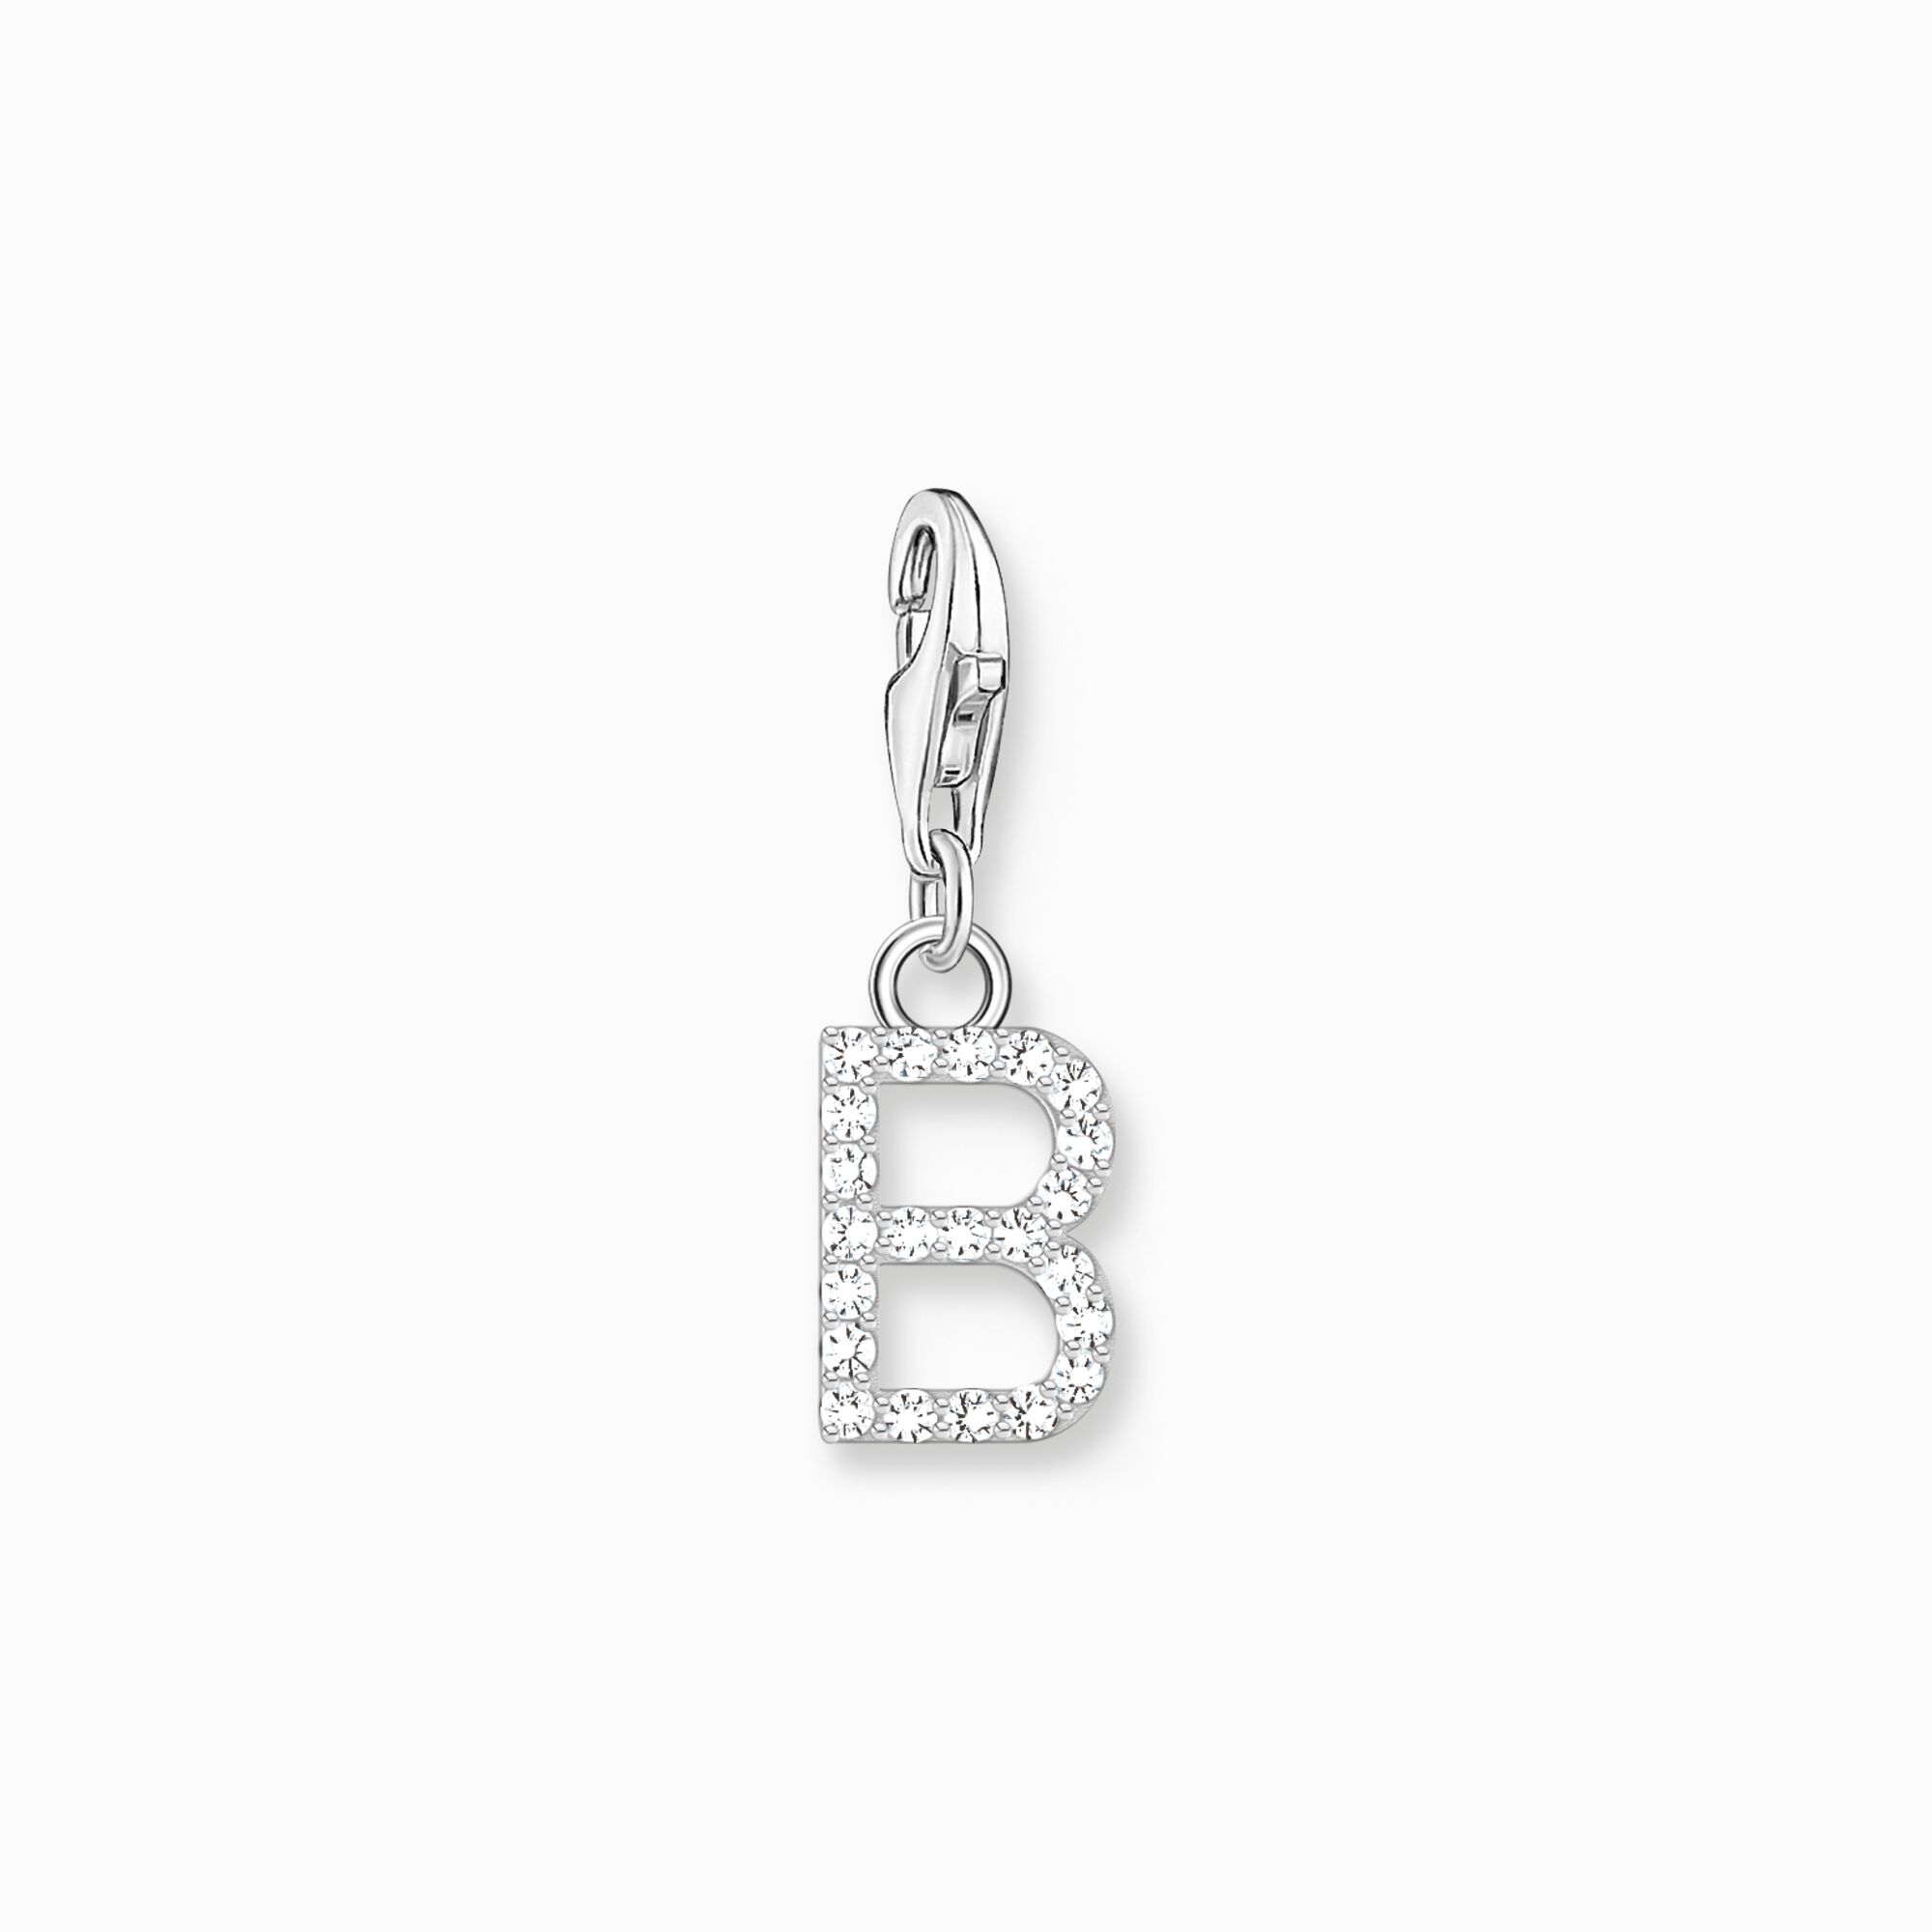 Charm pendant letter B with white stones silver from the Charm Club collection in the THOMAS SABO online store